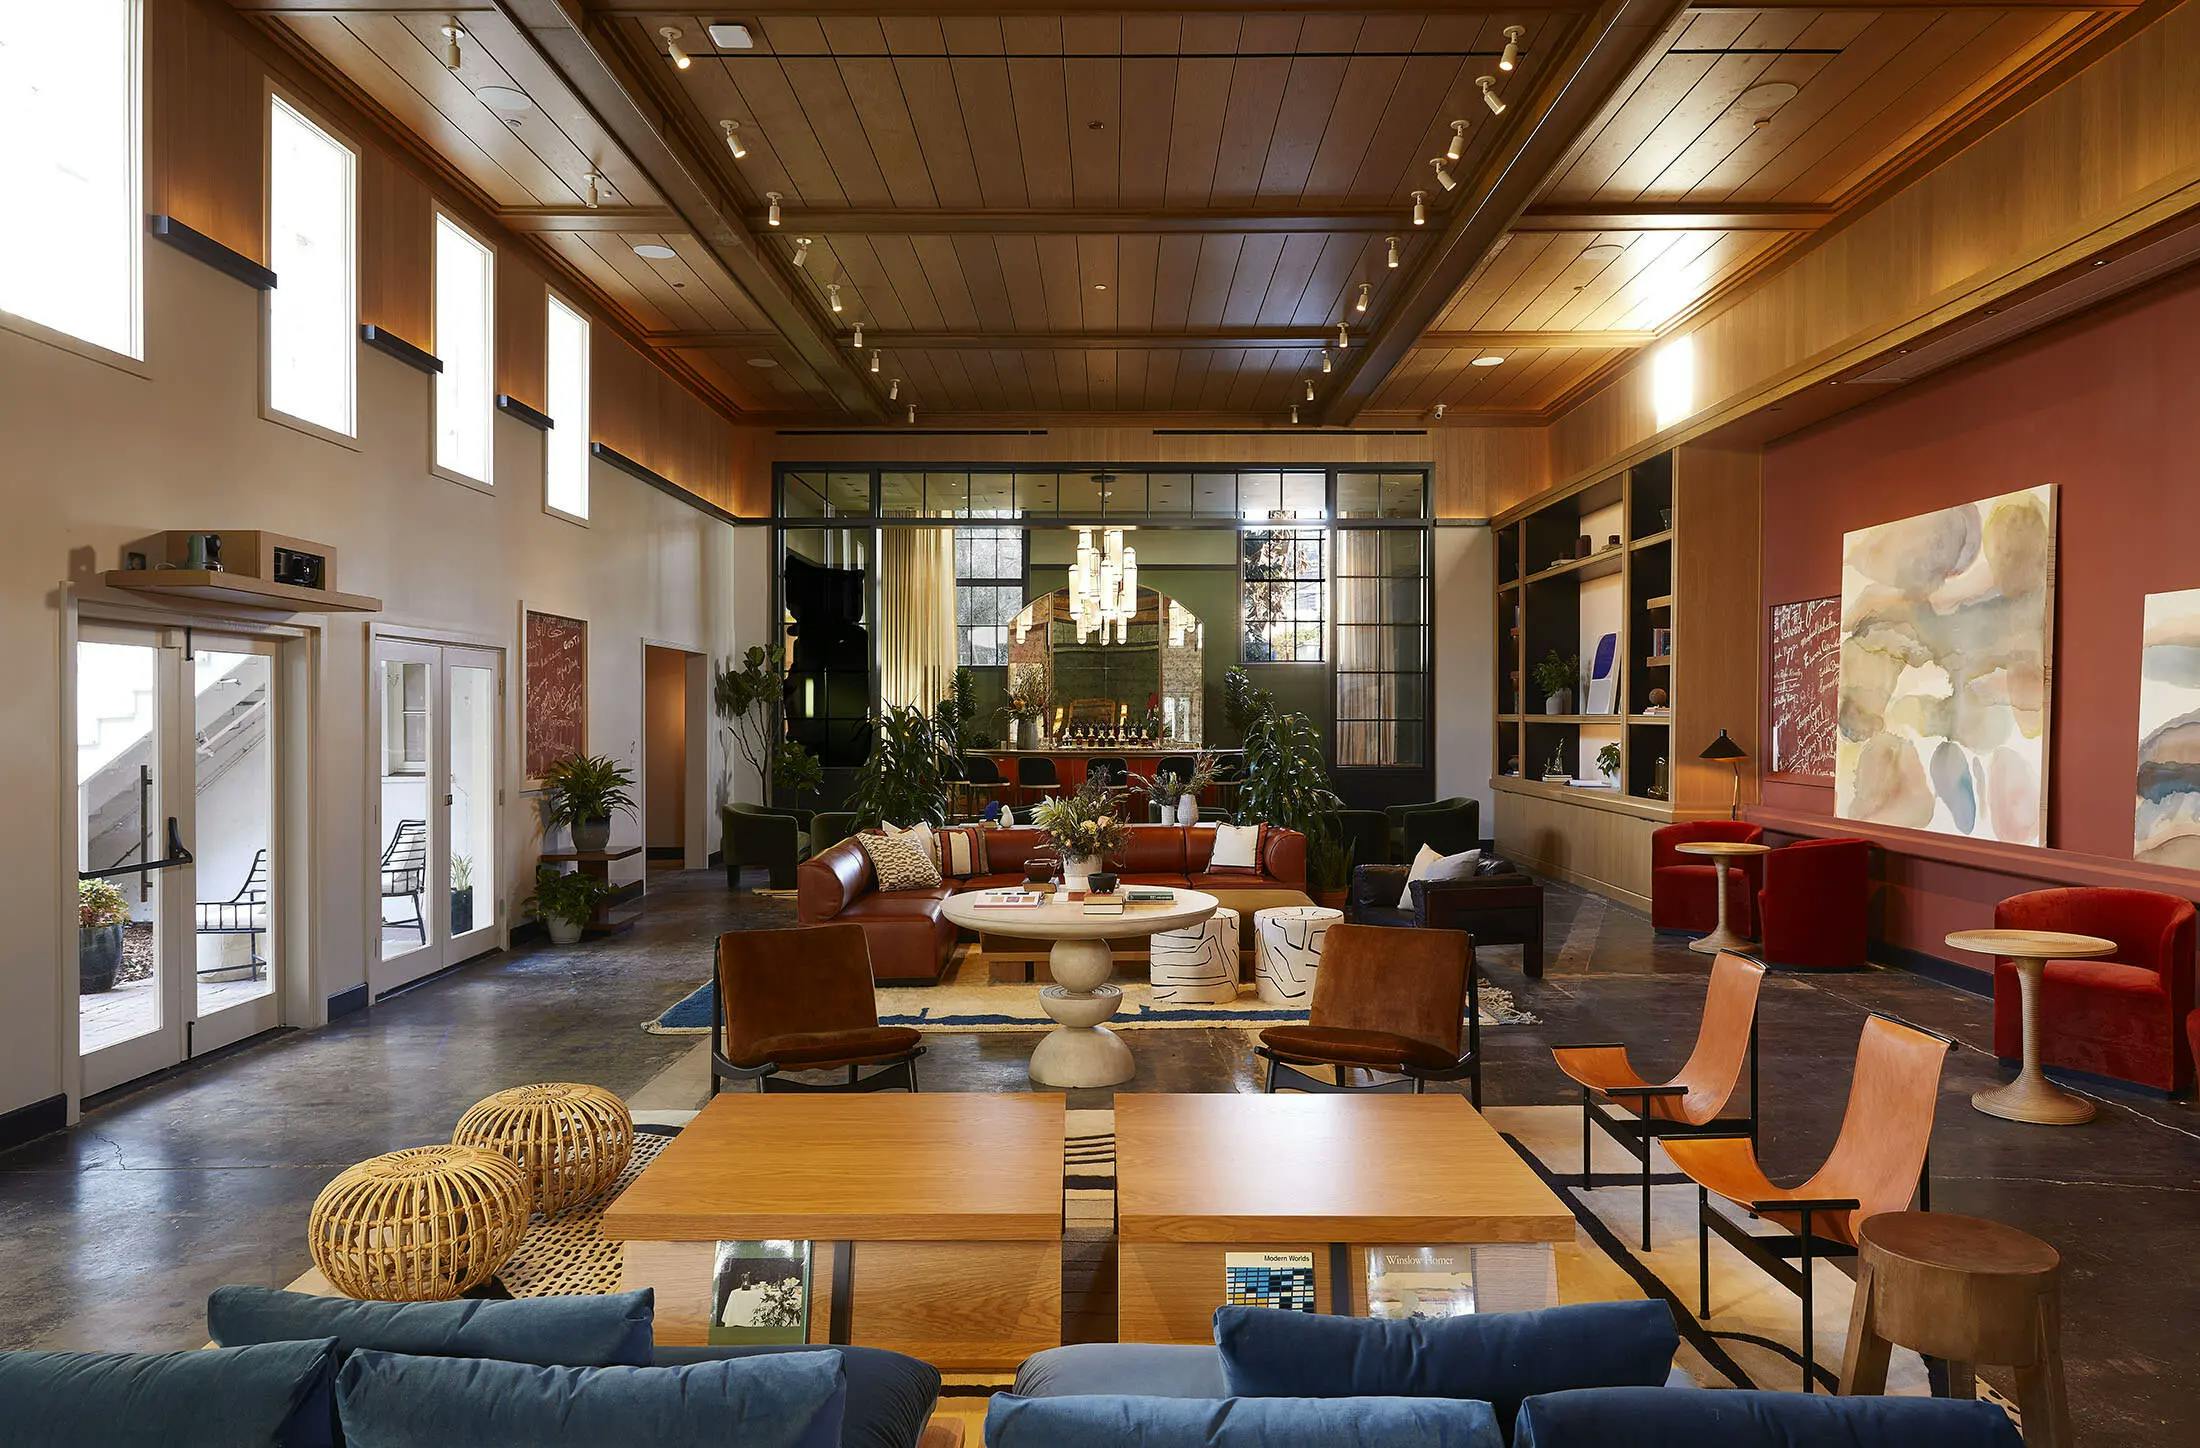 A lounge area with sofas and chairs in the Chief Los Angeles Clubhouse.